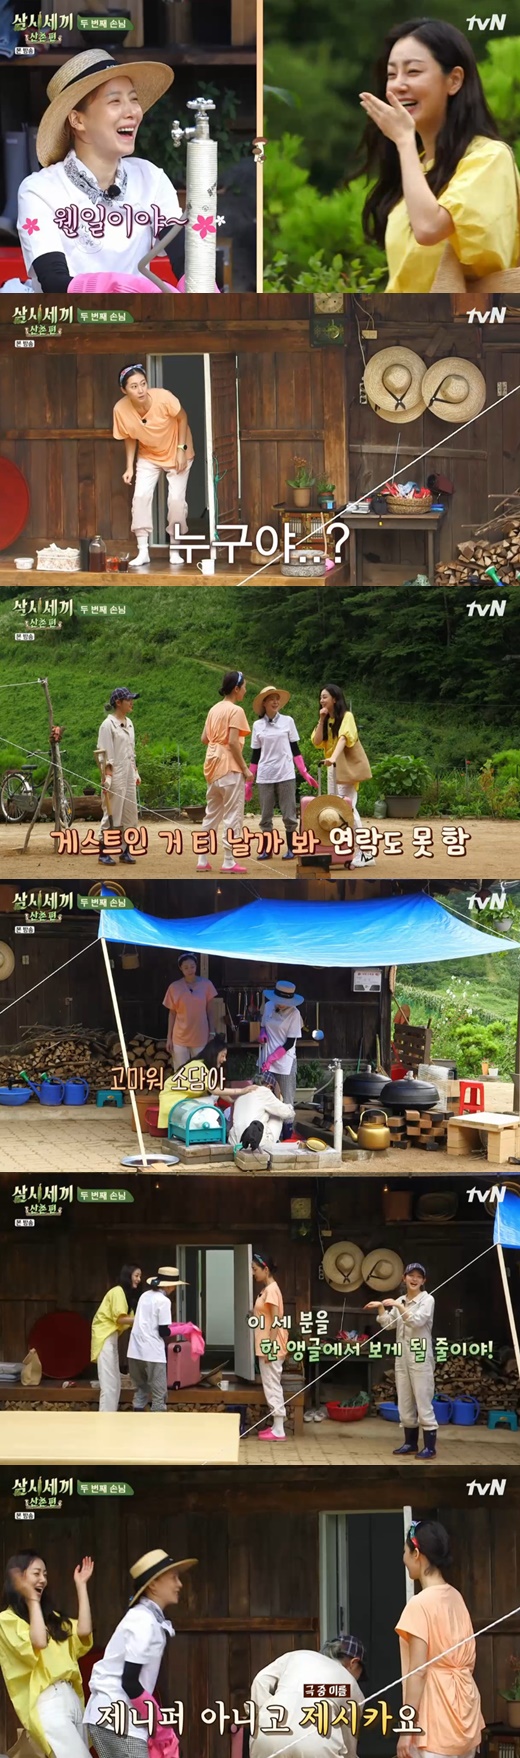 Three Meals a Day Mountain Village Oh Na-ra appeared as a surprise guestOn the cable channel tvN Three Meals a Day Mountain Village broadcasted on the 30th night, Actor Oh Na-ra was shown to come to the Sekis House as the second guest after Jung Woo-sung.Oh Na-ra was acquainted with Yum Jung-ah and Yoon Se-ah for their relationship in Skycastle.Yum Jung-ah, Yoon Se-ah, was surprised and pleased by the appearance of Oh Na-ra; Yum Jung-ah said, Did you eat breakfast? and You really have a lot to do today.I have to go to the mart and soak kimchi and plant cabbage at lunch. Welcome home. Oh Na-ra then told Park So-dam with a unique affinity, Well be close in an hour, he said, I saw it so well, Im a parasite.Yum Jung-ah referred to Park So-dams character in the parasite and asked, Did you be Jennifer? and Park So-dam said, It was Jessica, prompting a rave.